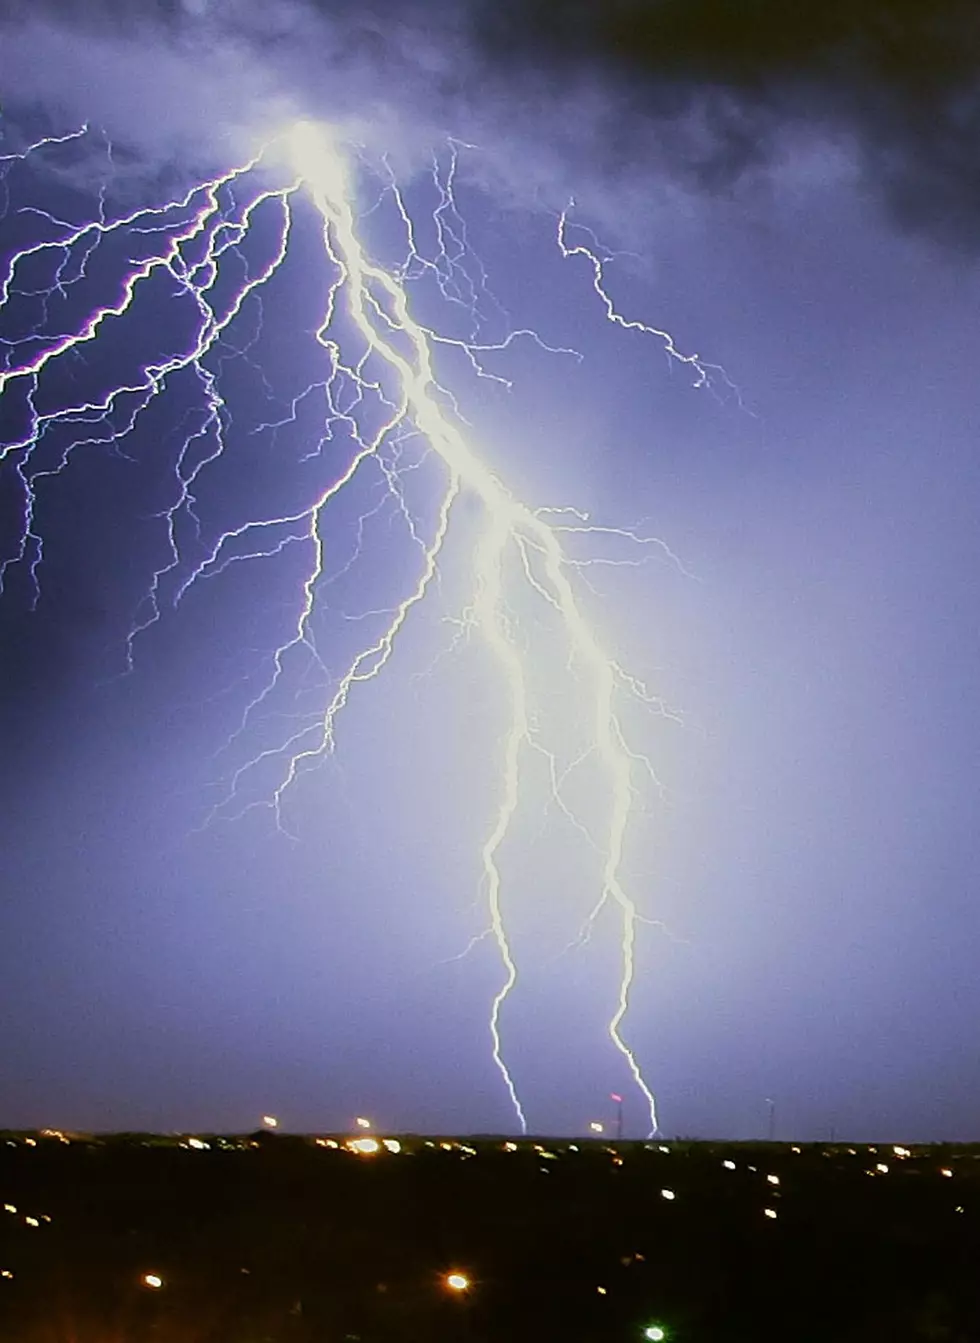 Free Beer & Hot Wings: No One Wants to be This Close to a Lightning Strike [Video]